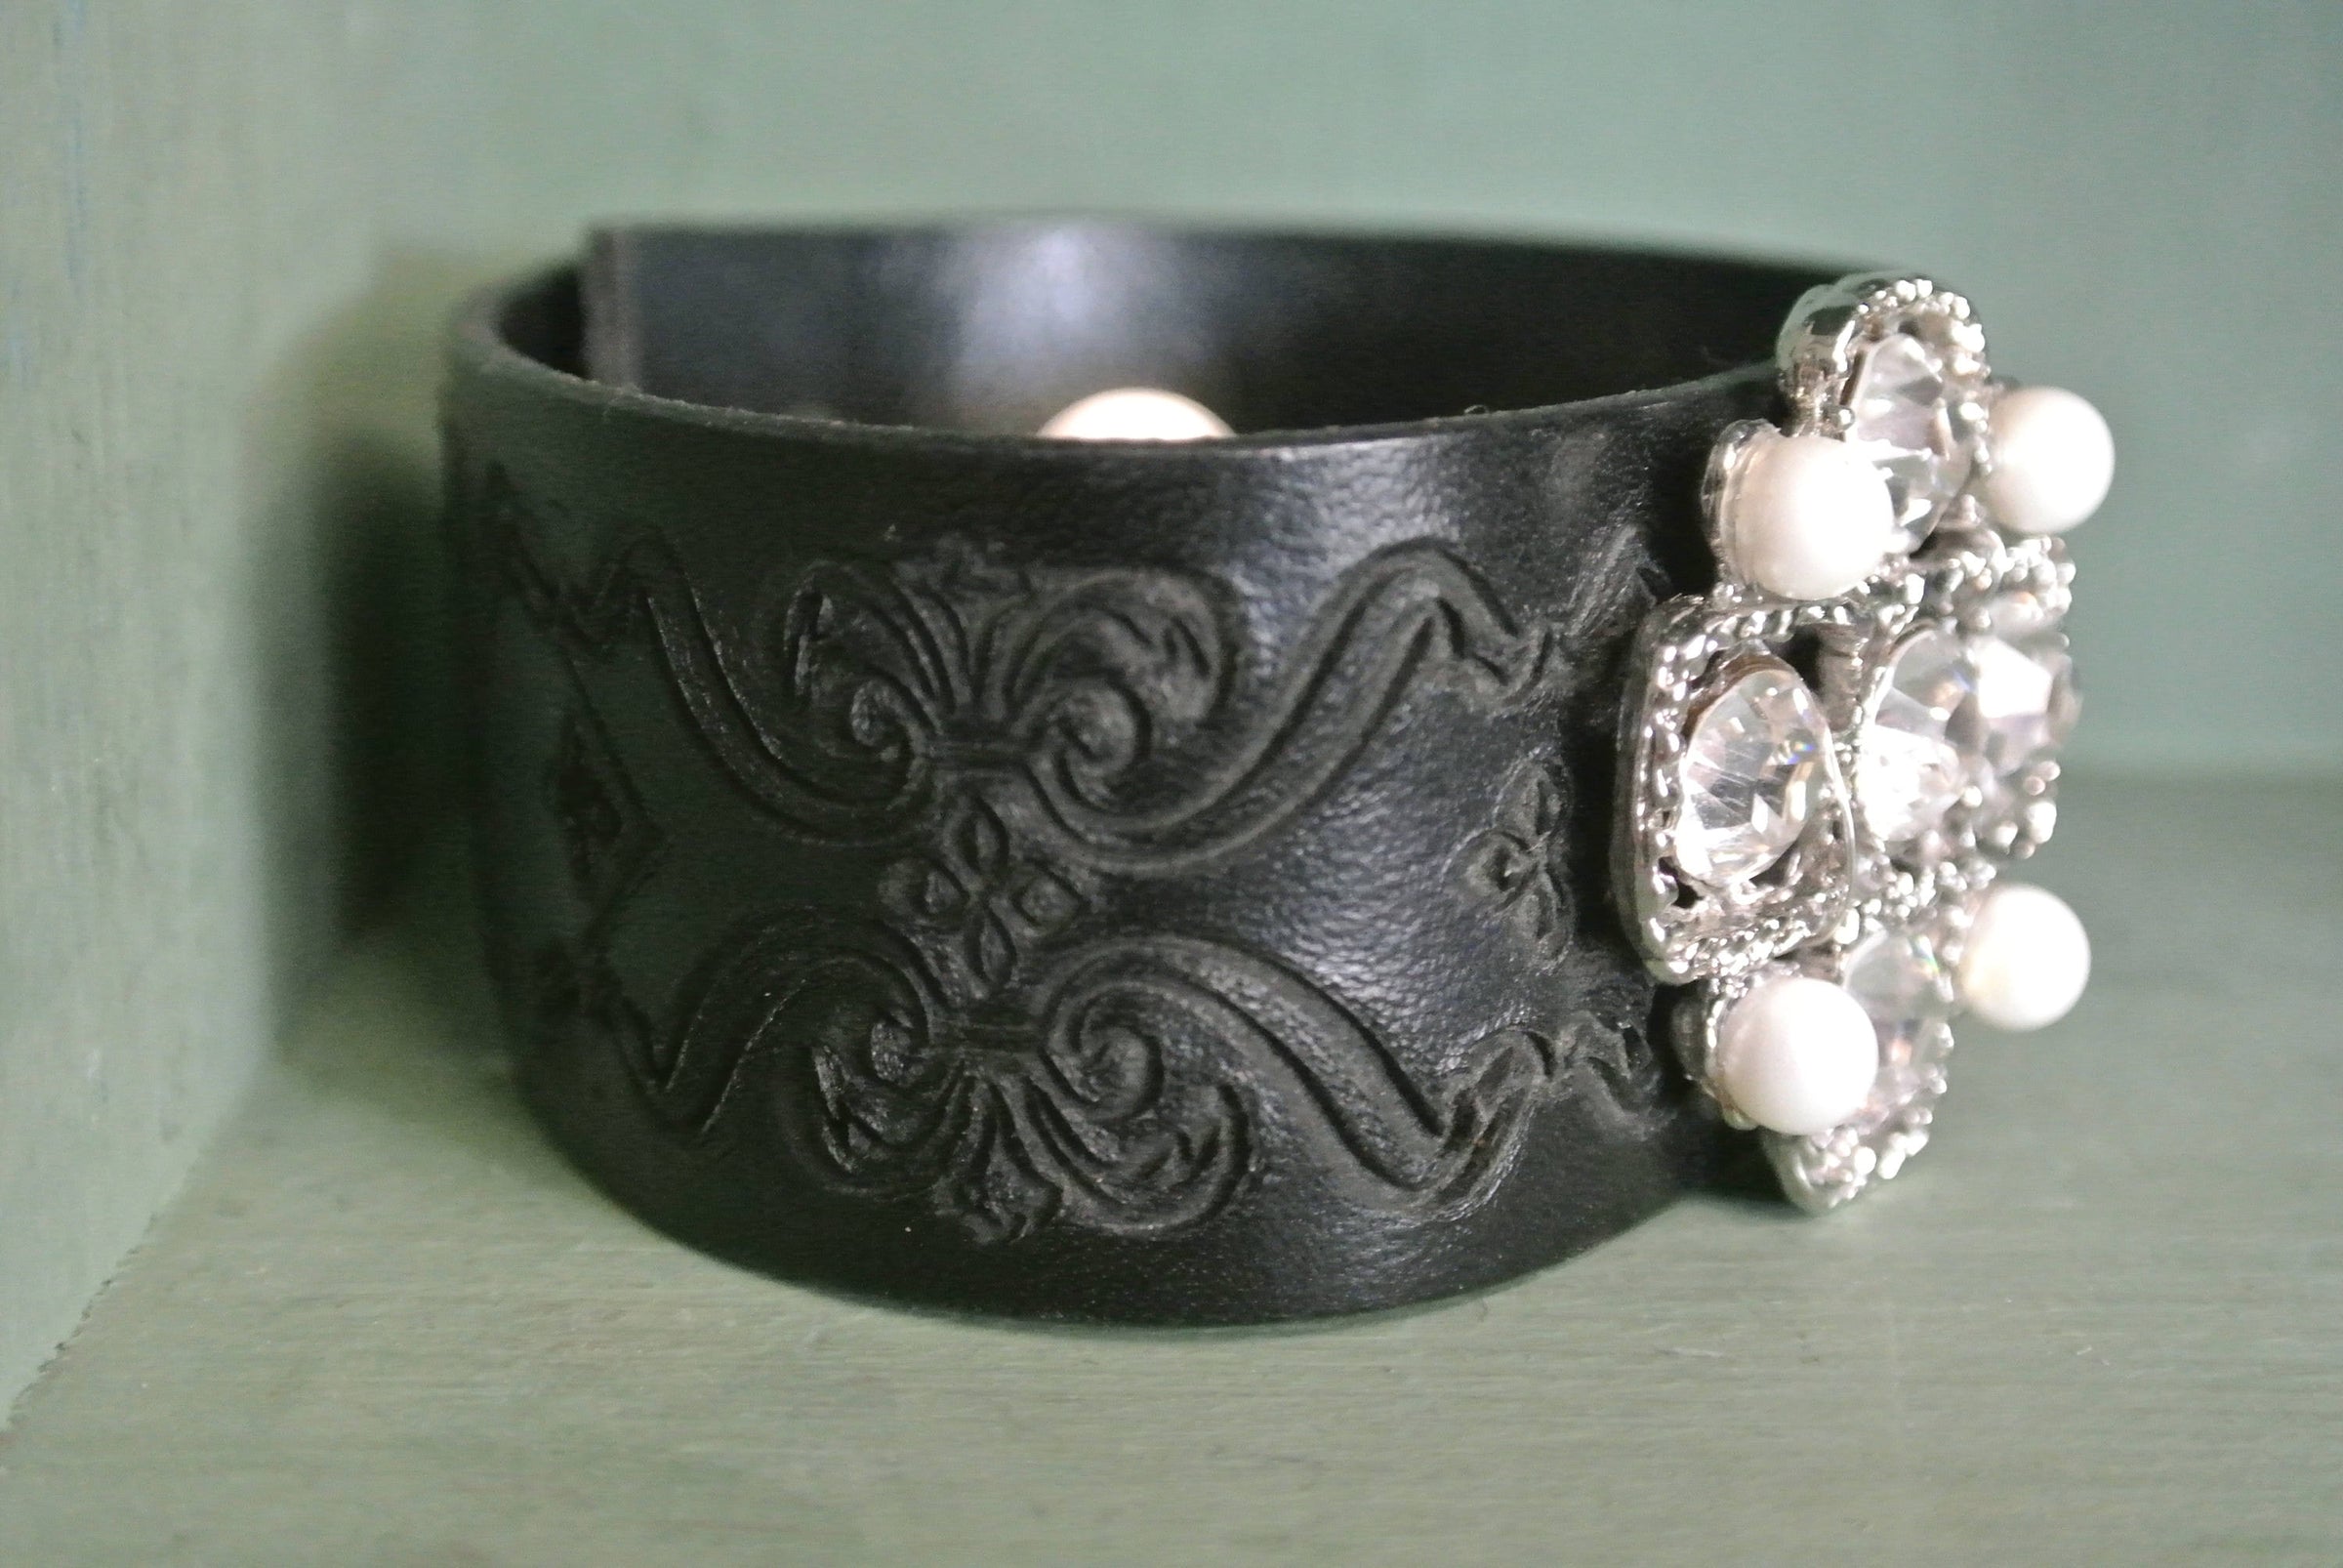 Leather Cuff Bracelet with repurposed brooch